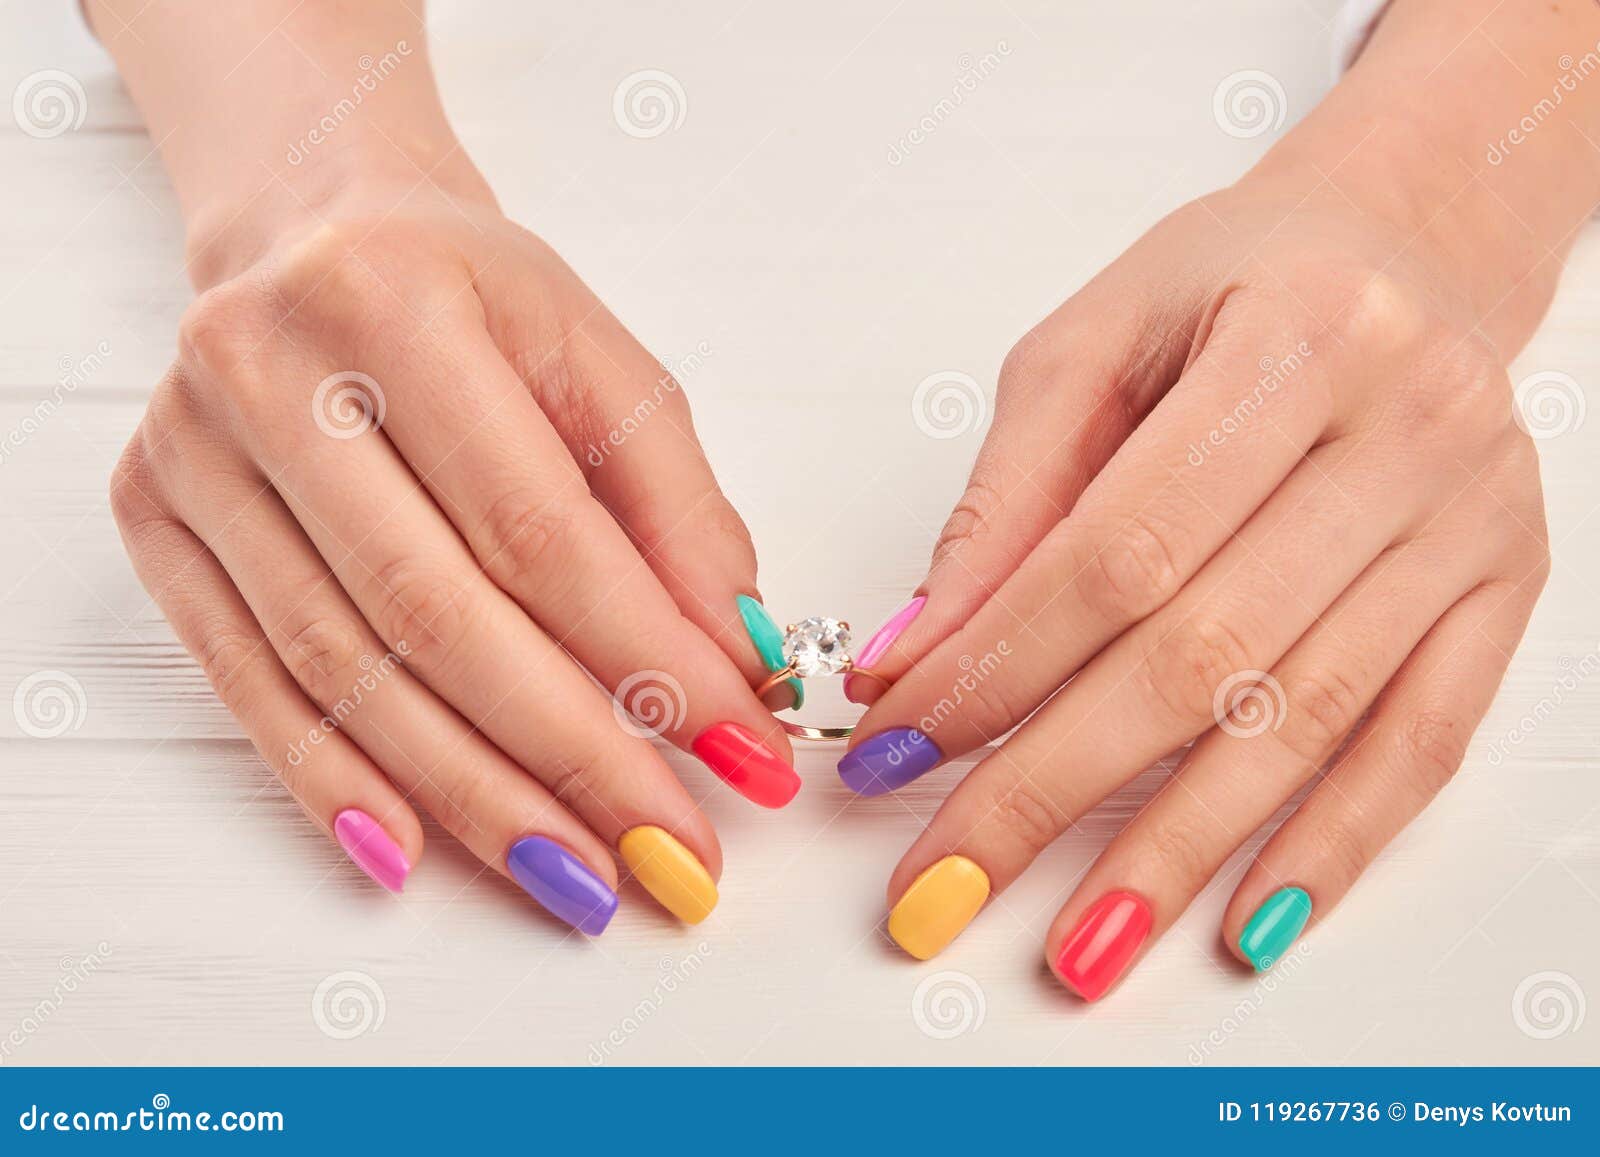 Manicured Hands Holding Ring with Diamond. Stock Photo - Image of ...